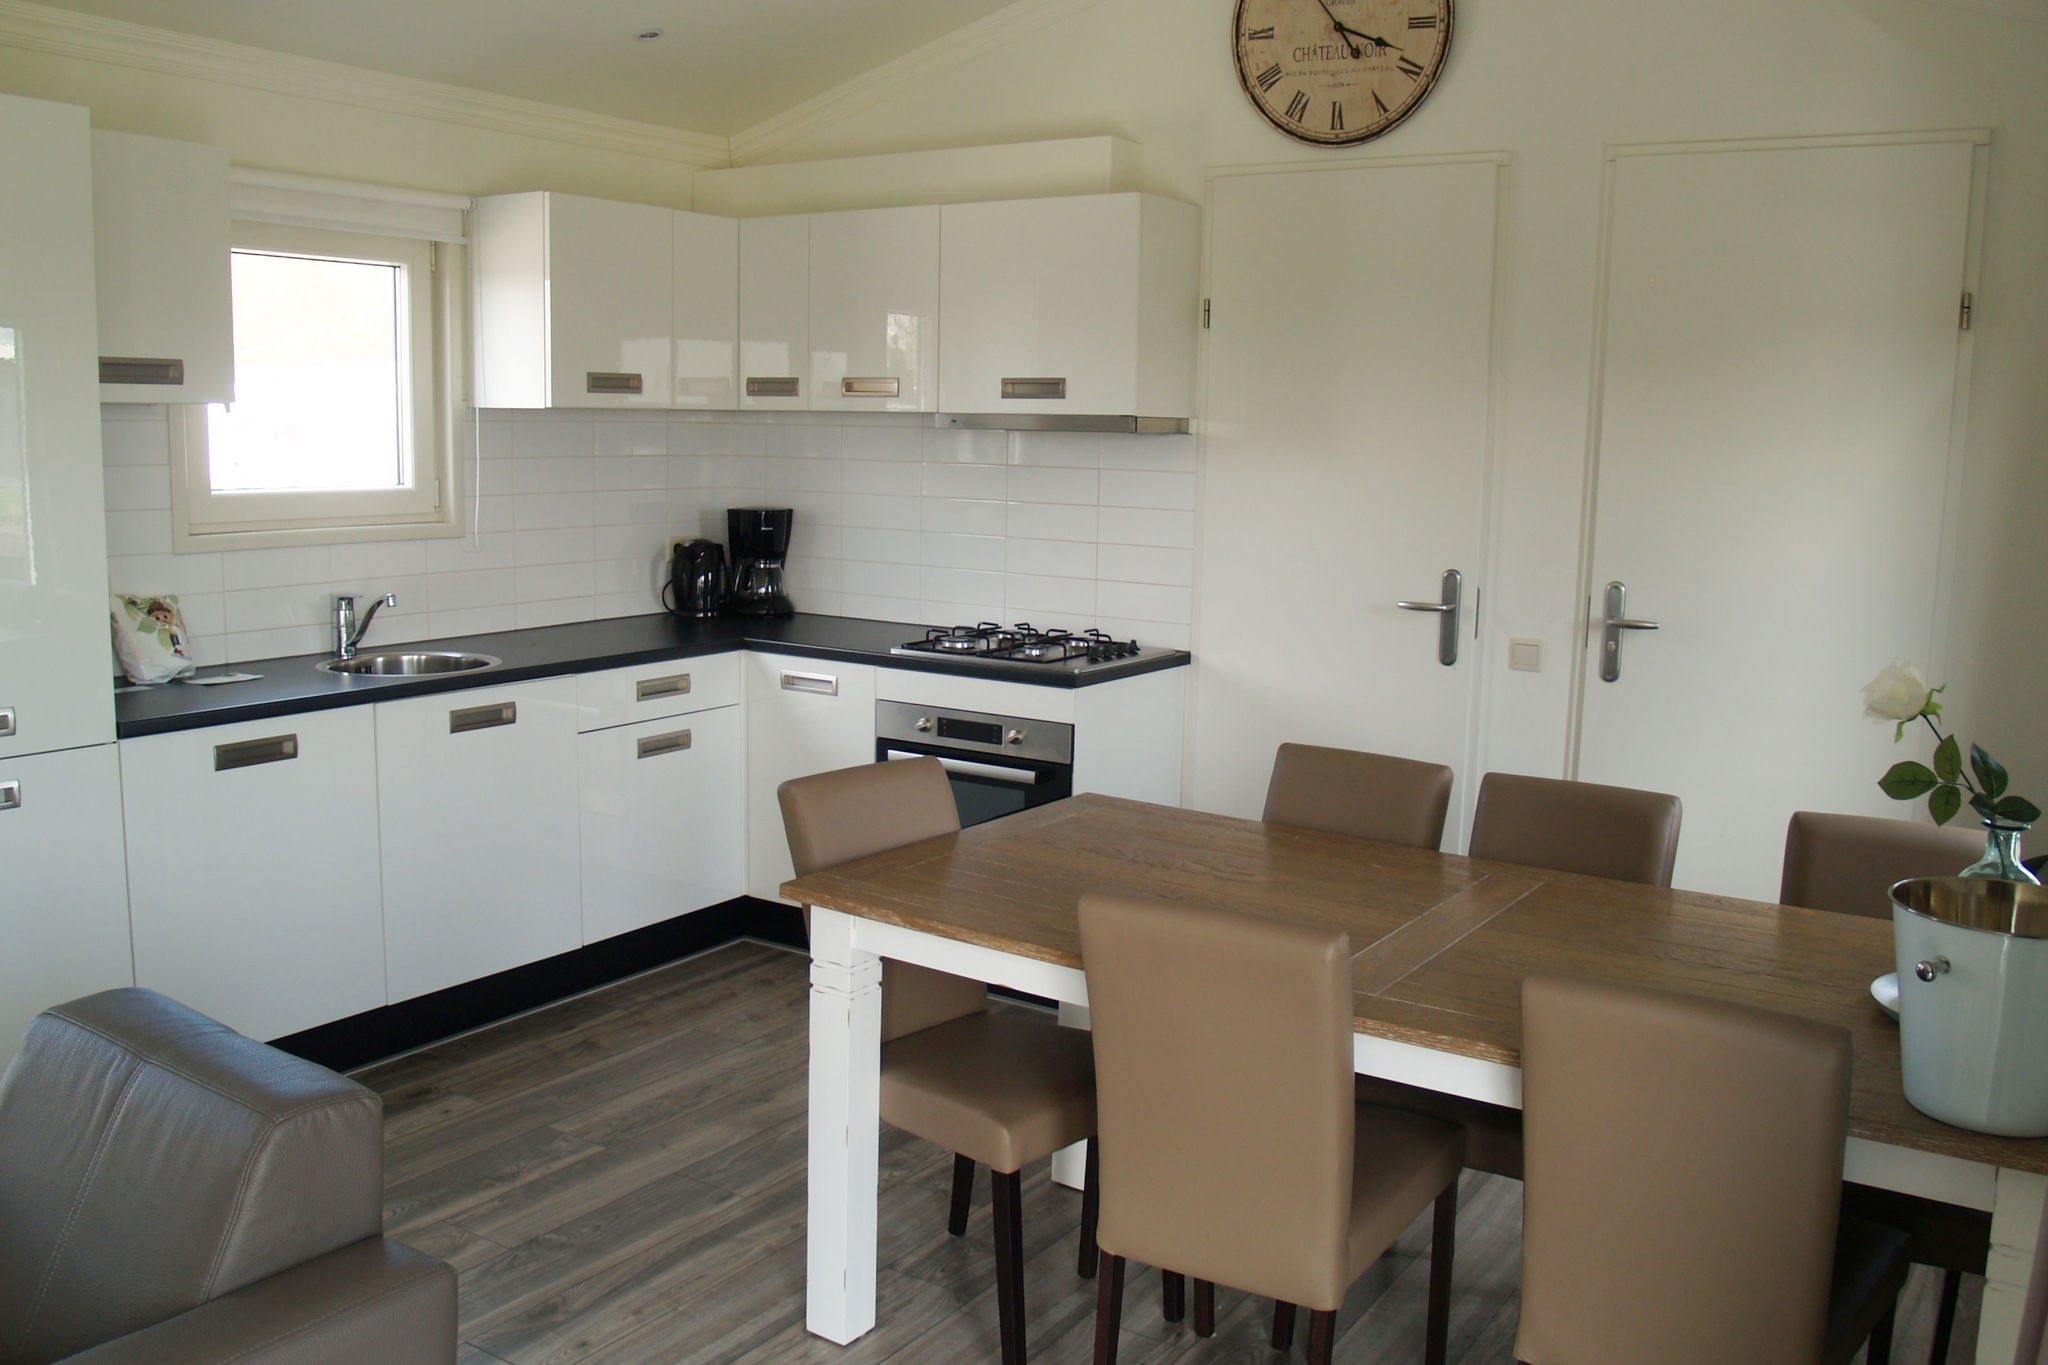 Detached chalet with dishwasher